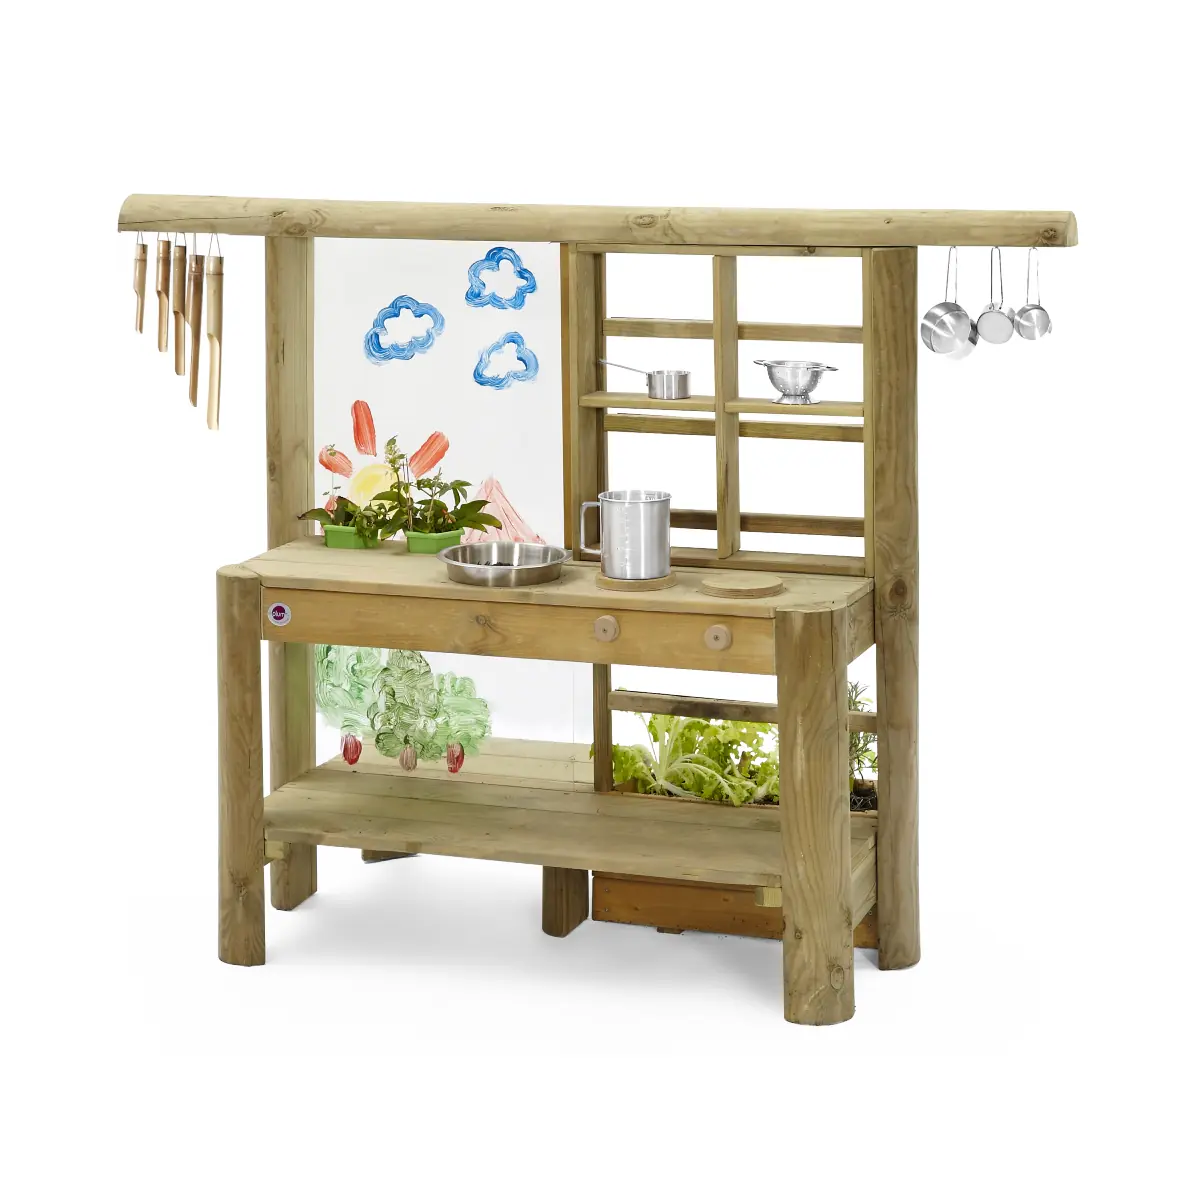 Image of Plum Play Discovery Mud Pie Kitchen